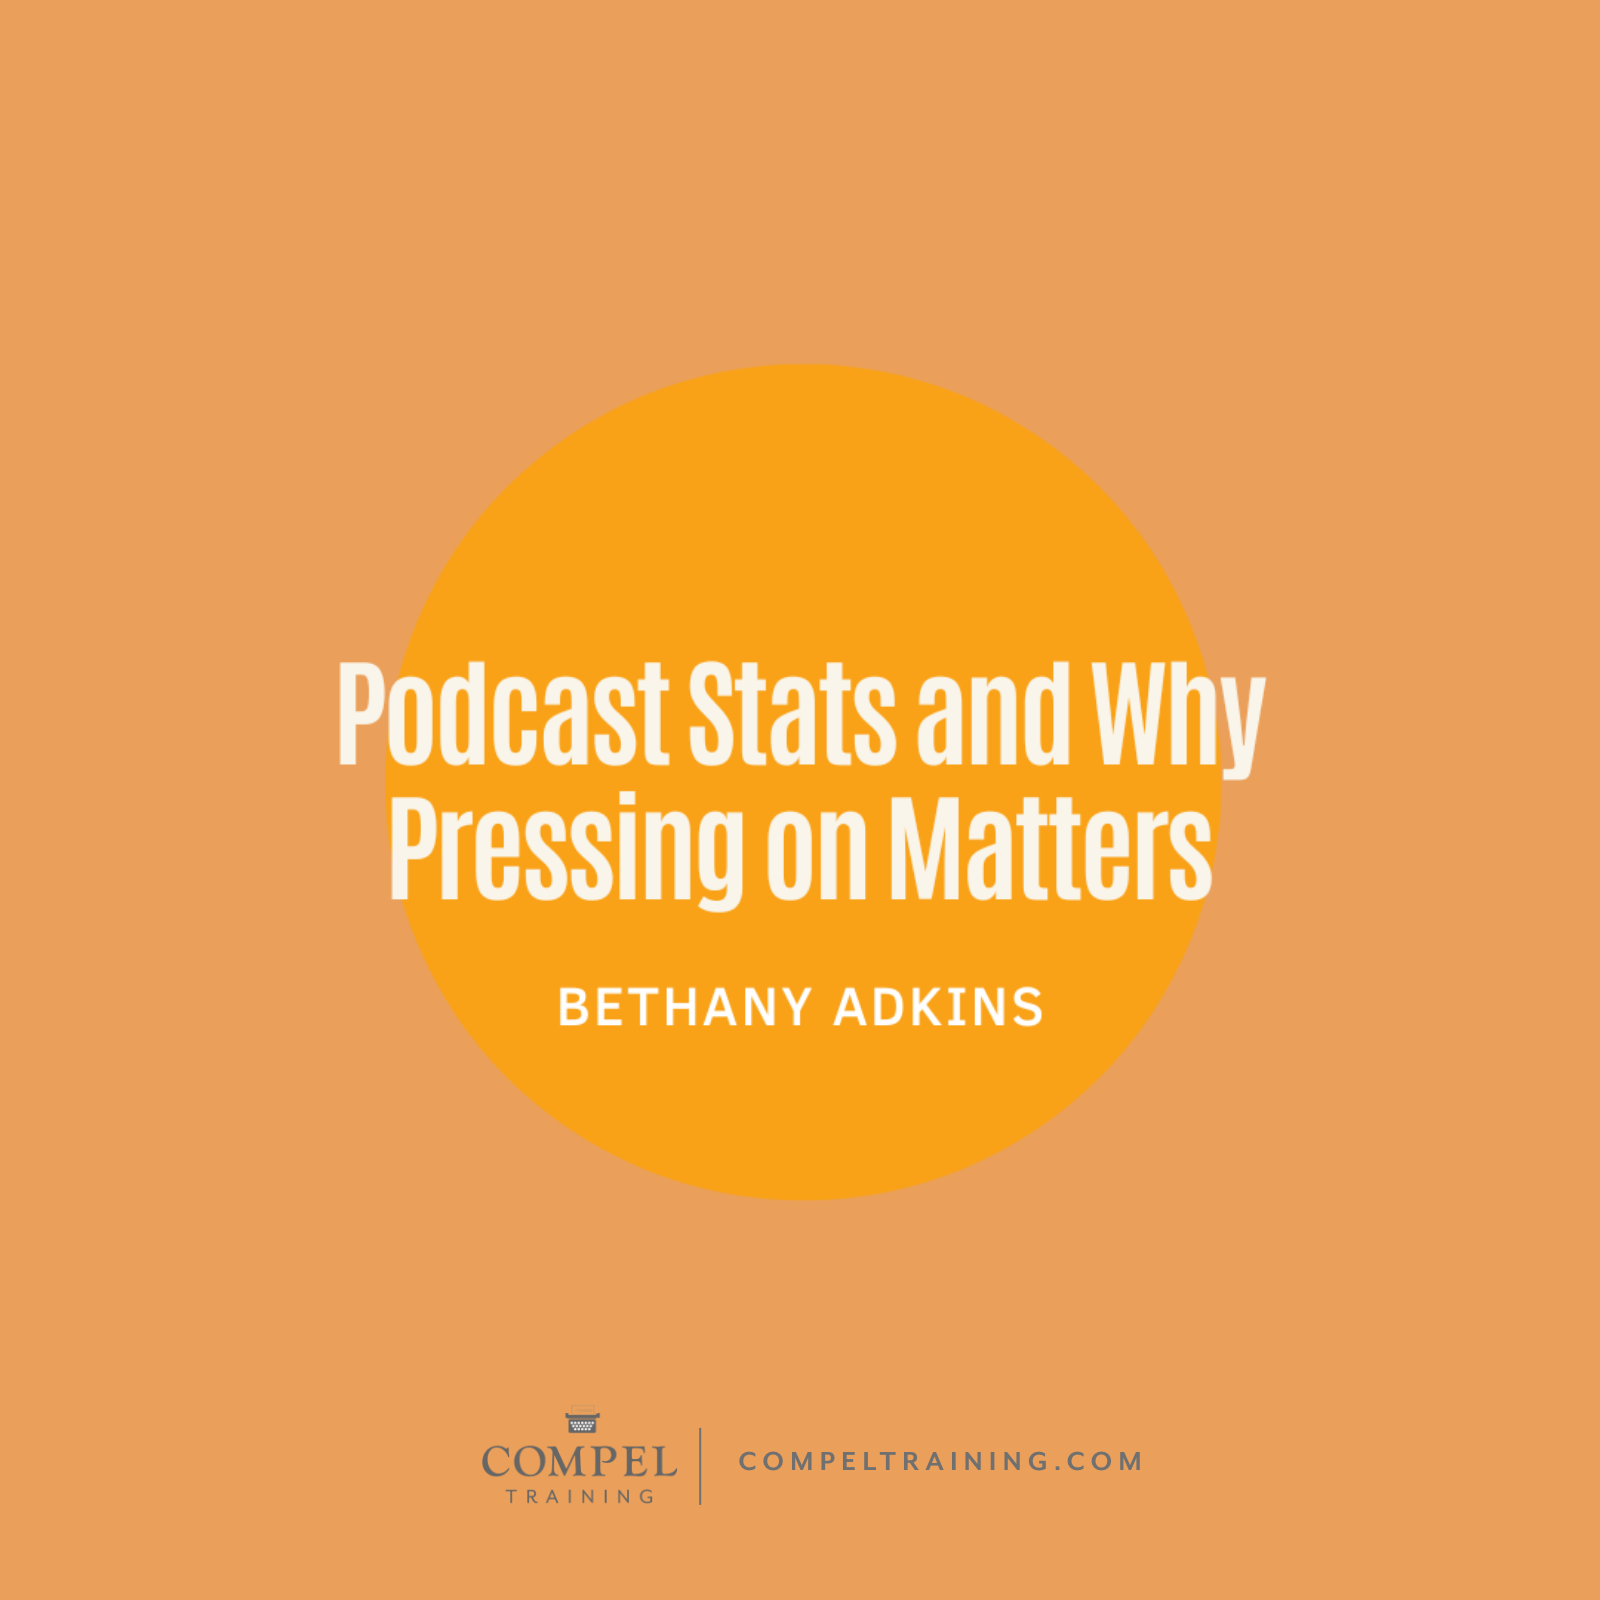 Podcast Stats and Why Pressing on Matters